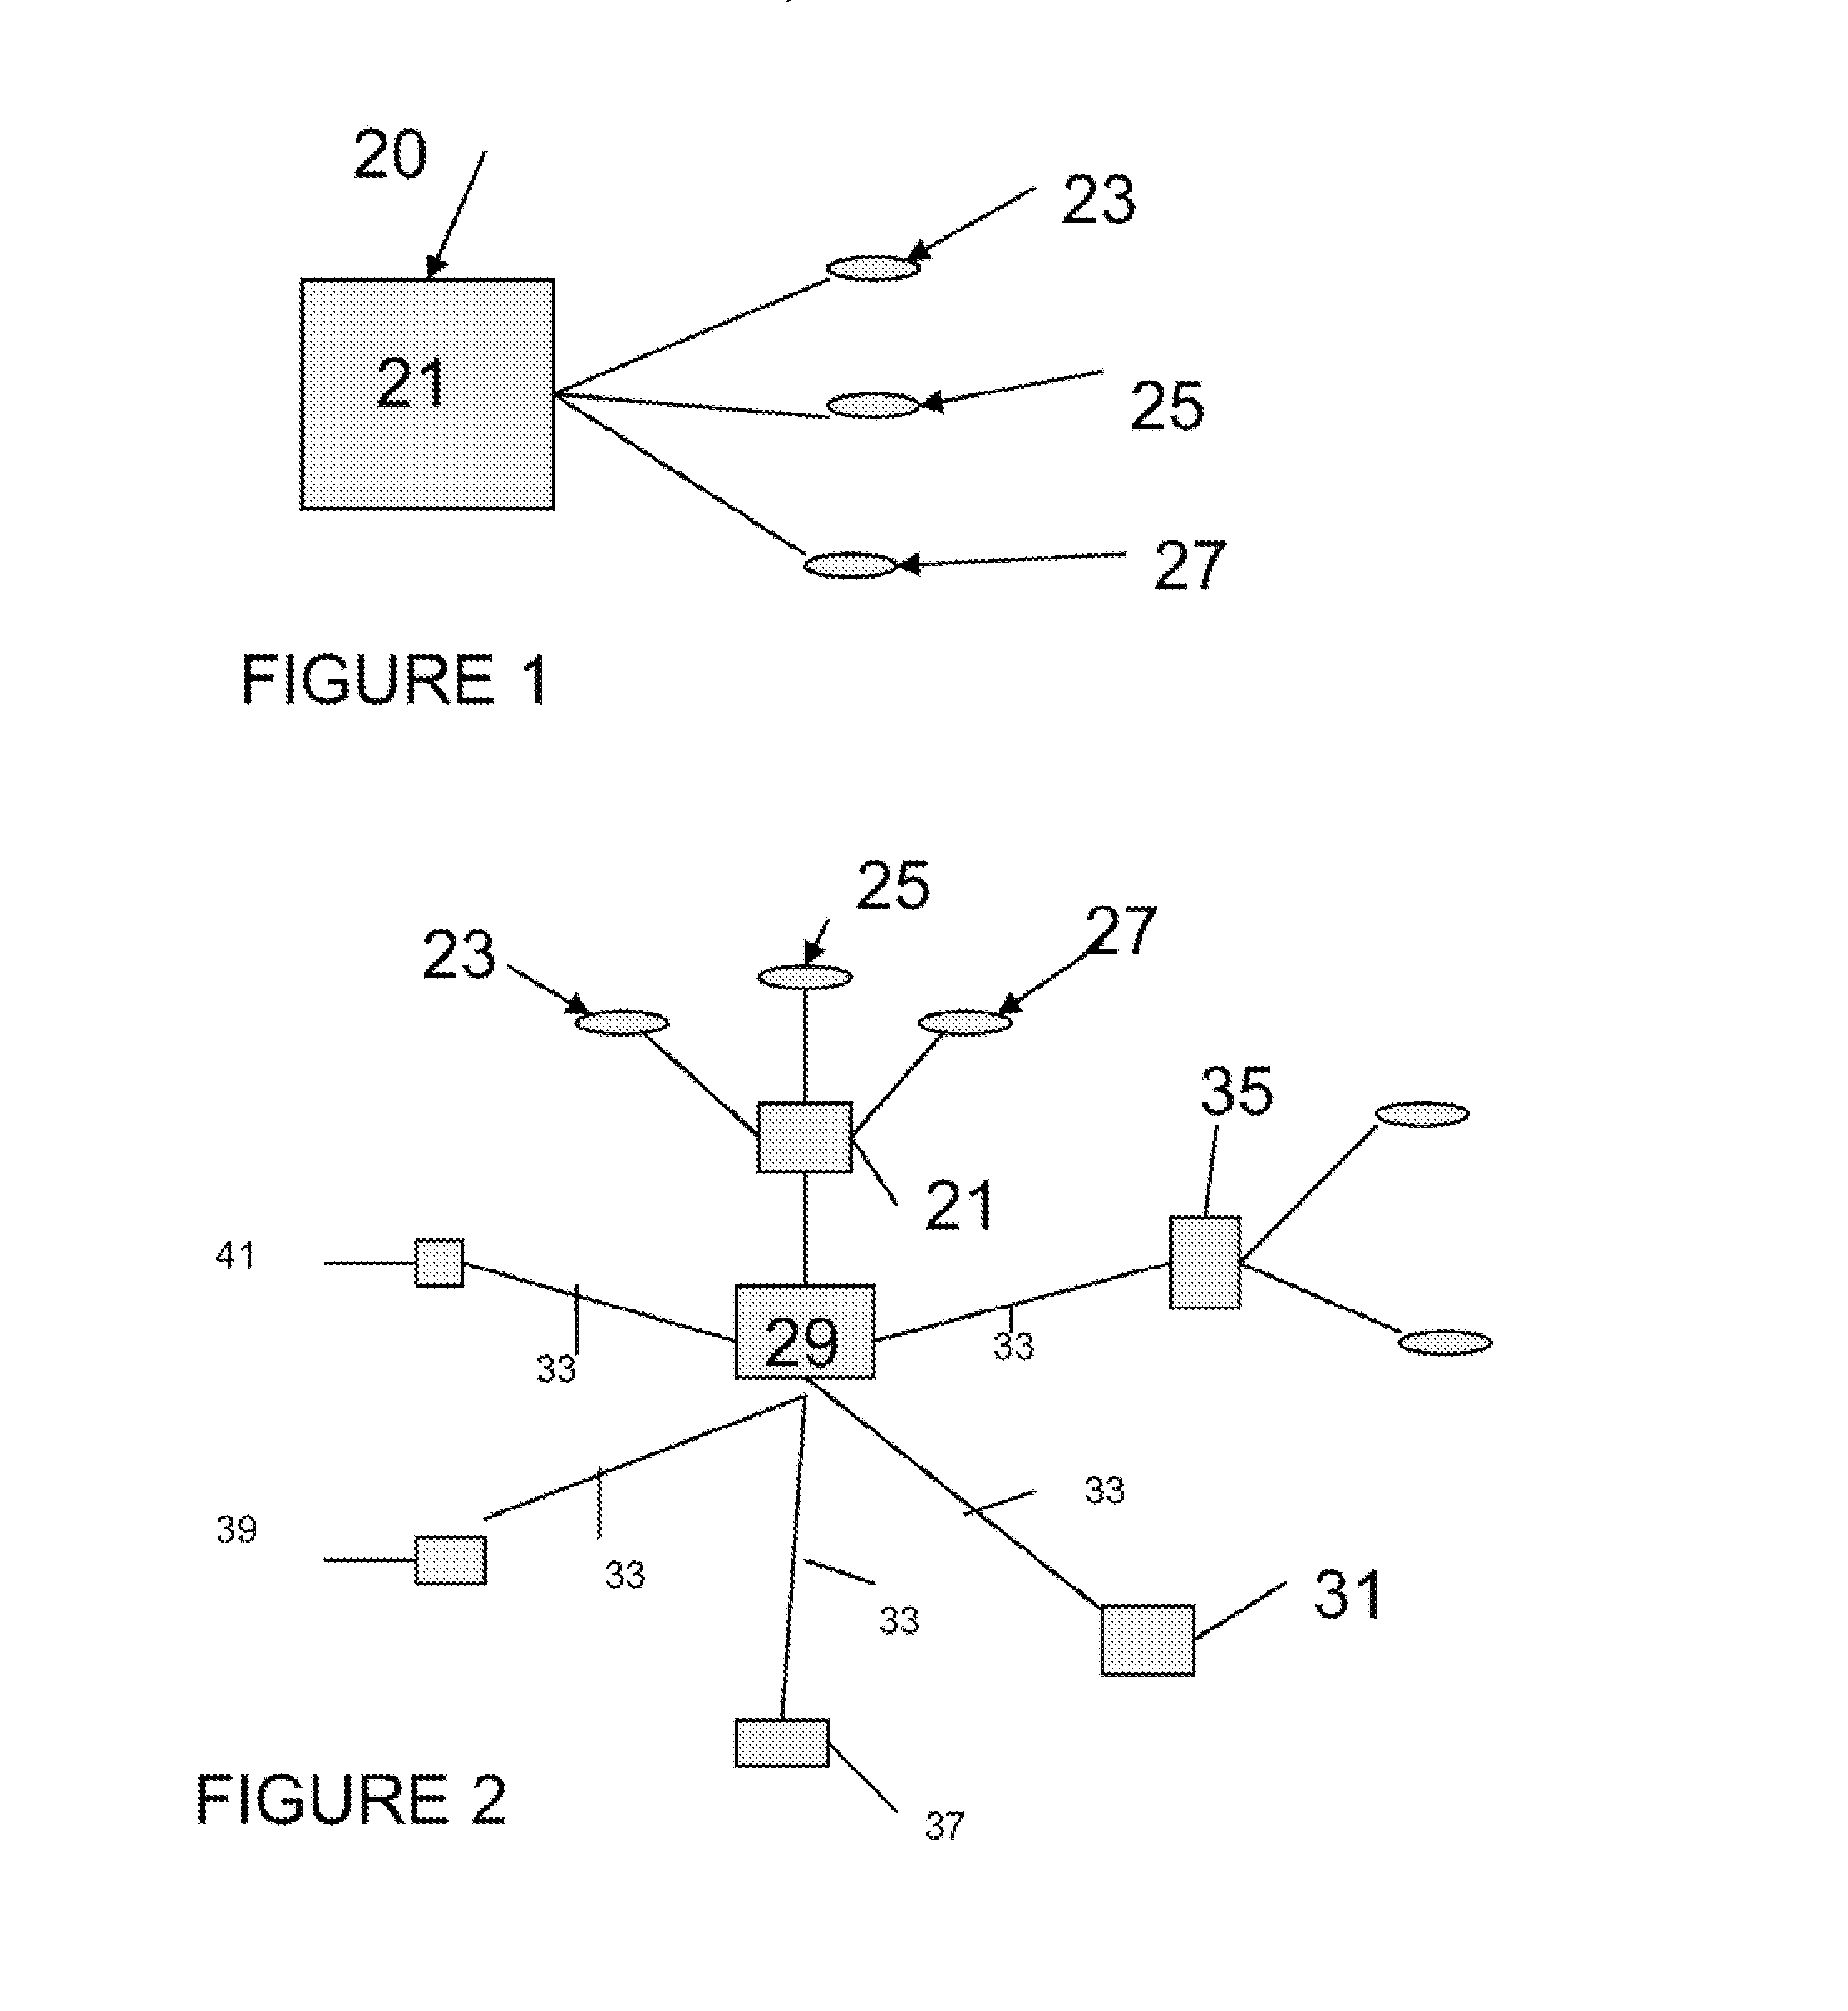 Knowledge archival and recollection systems and methods